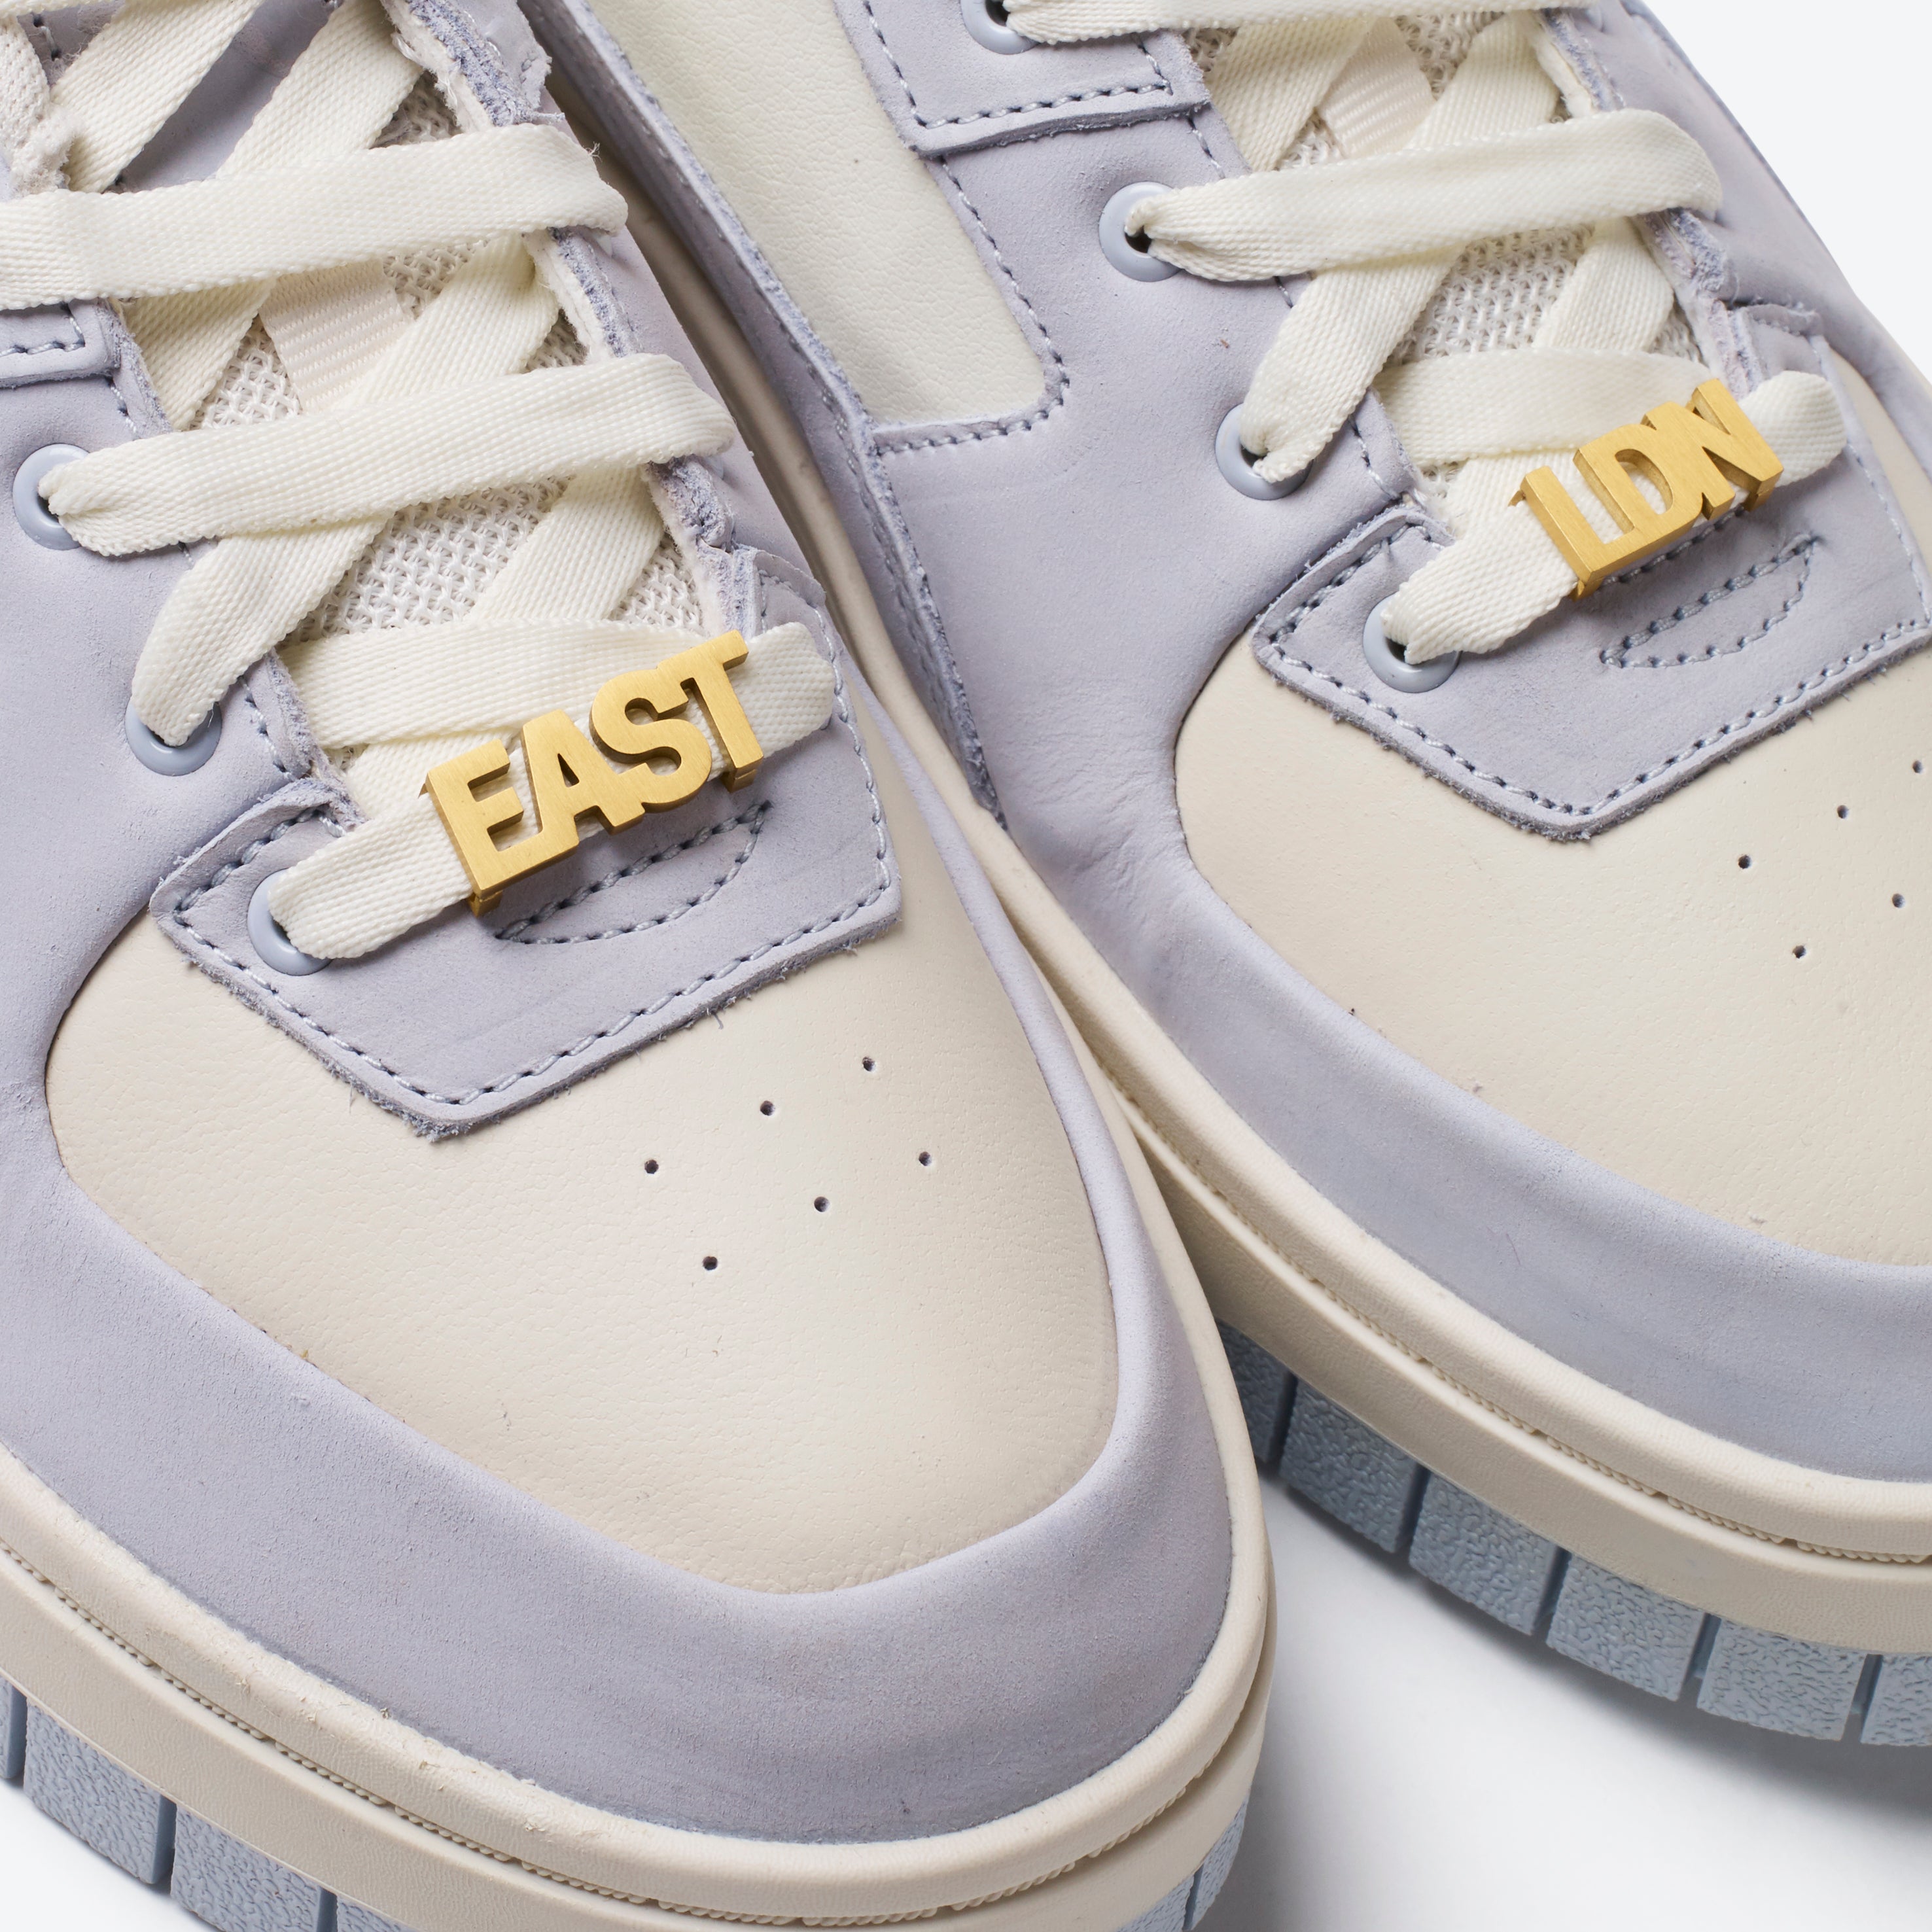 'EAST LDN' Shoelace Charms